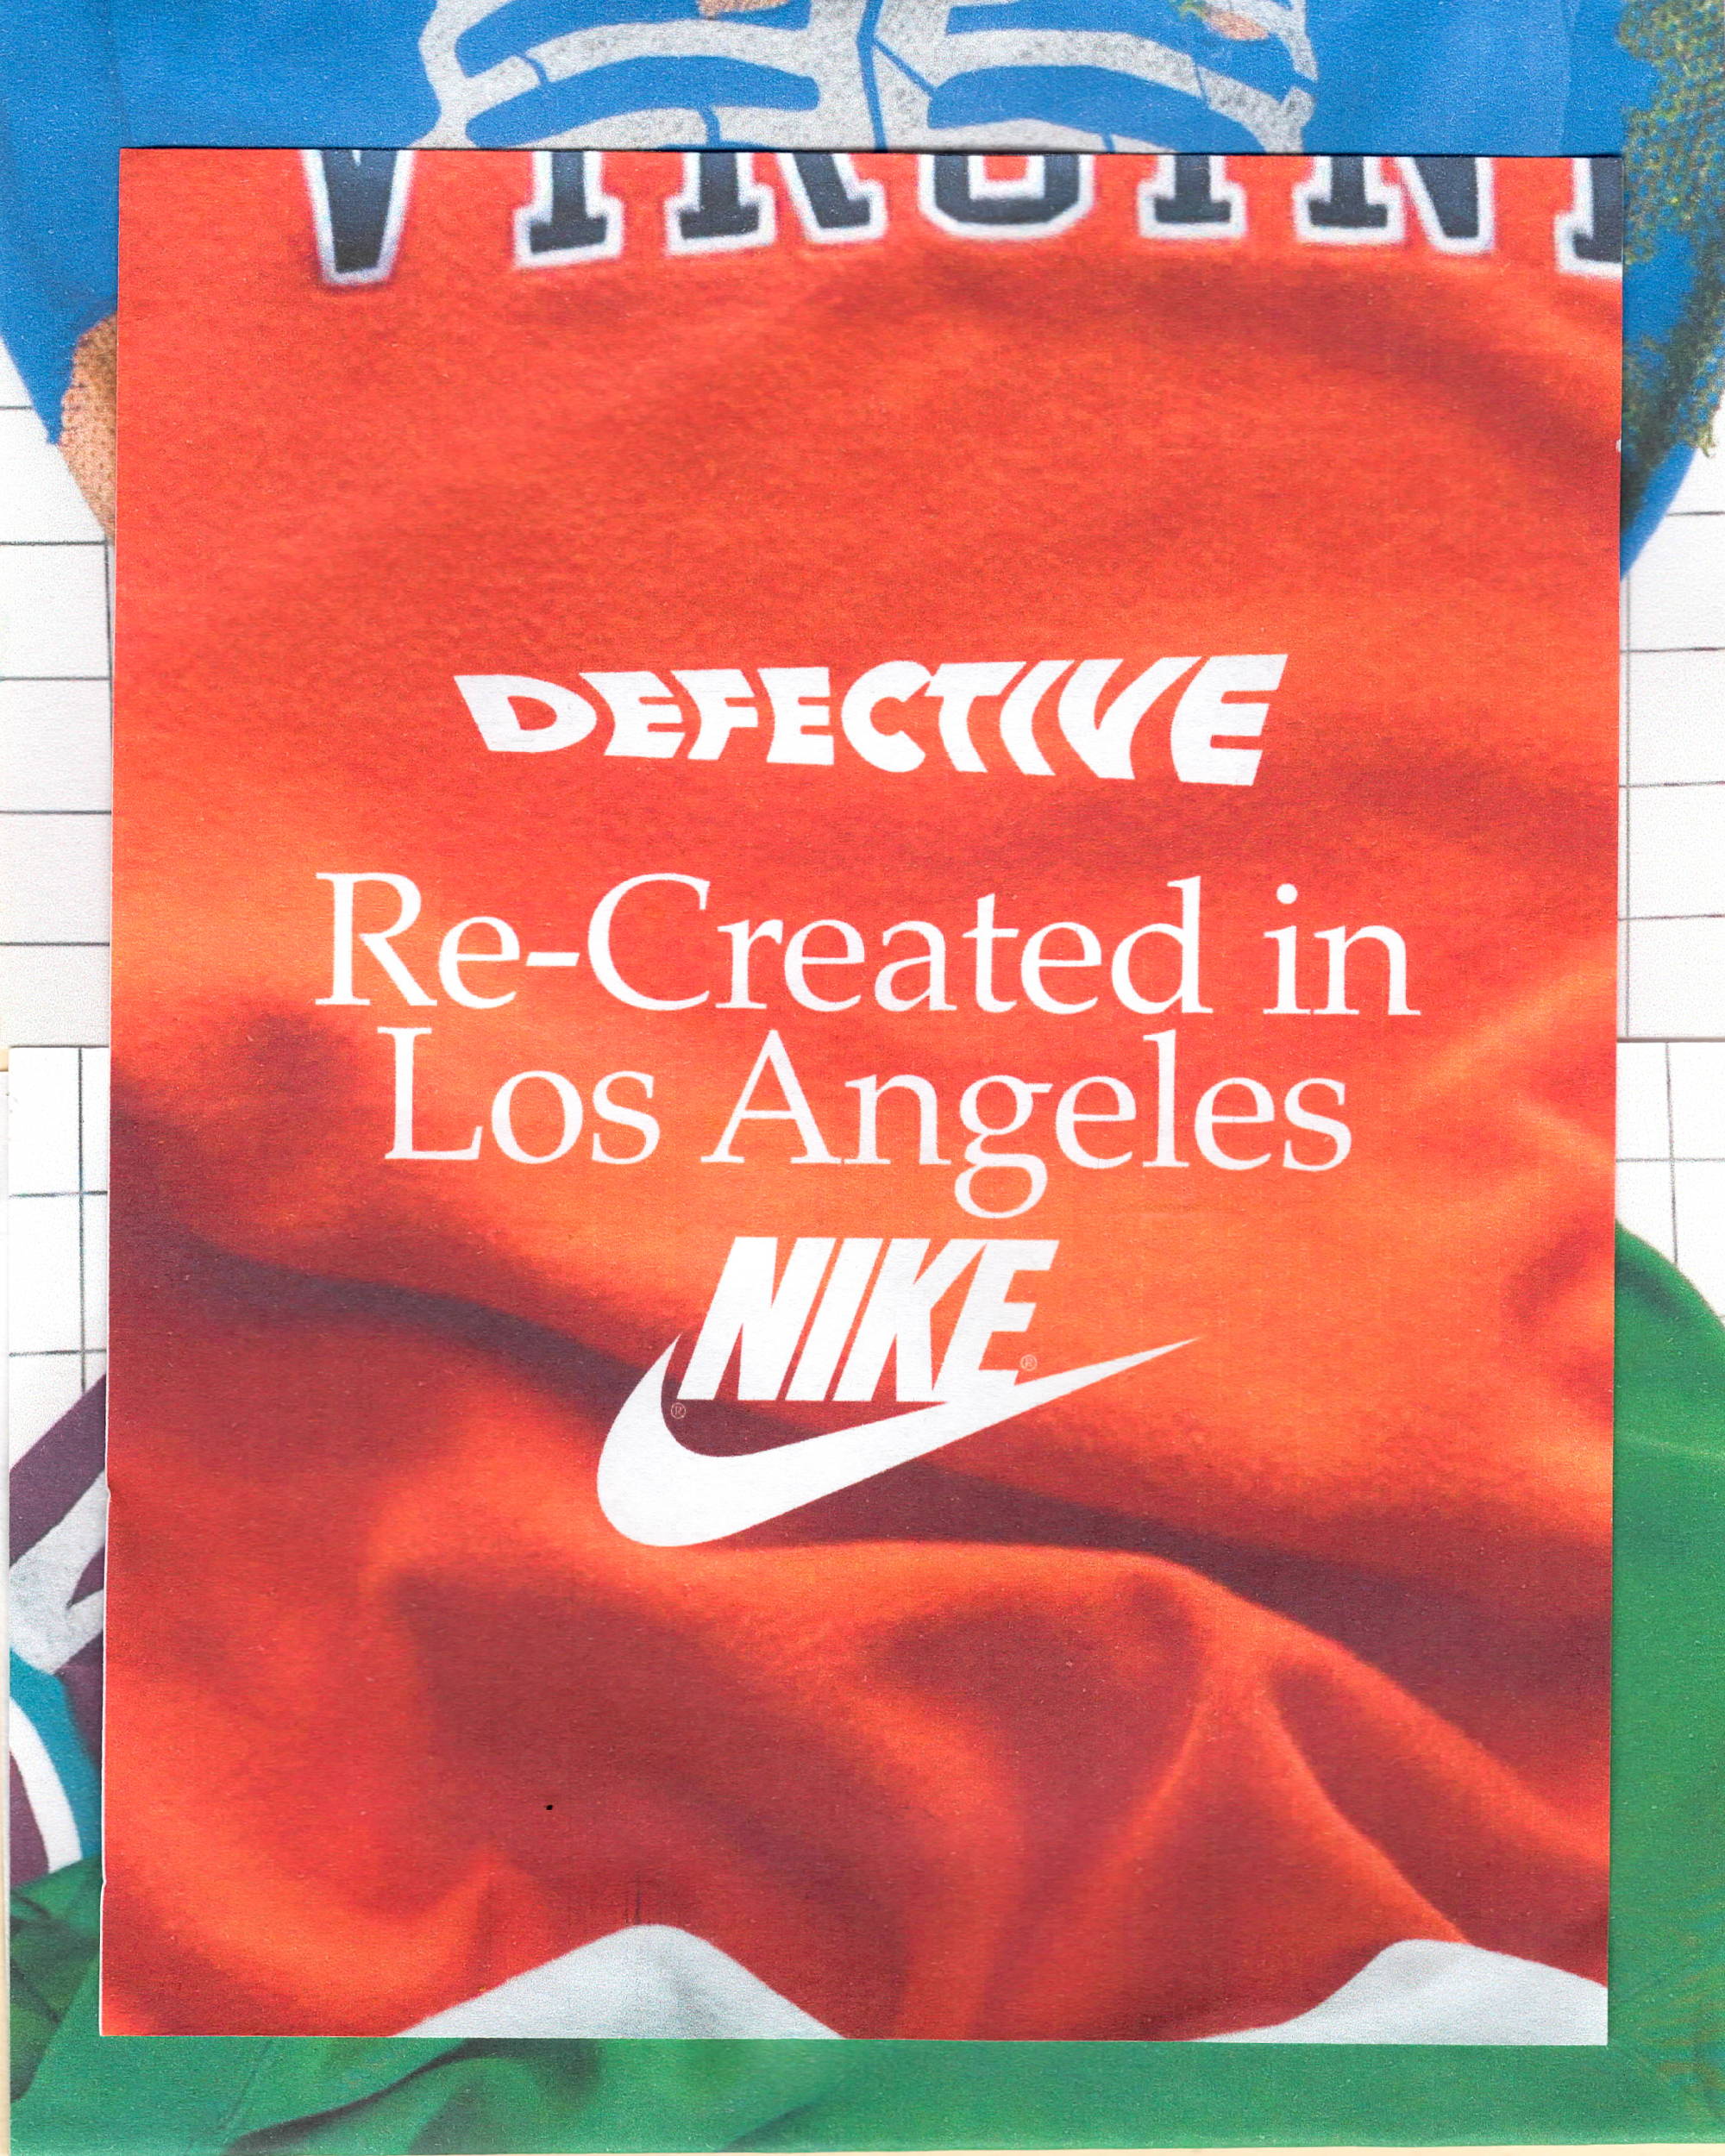 In Conversation w/ Nike Re-Creation and Defective Garments